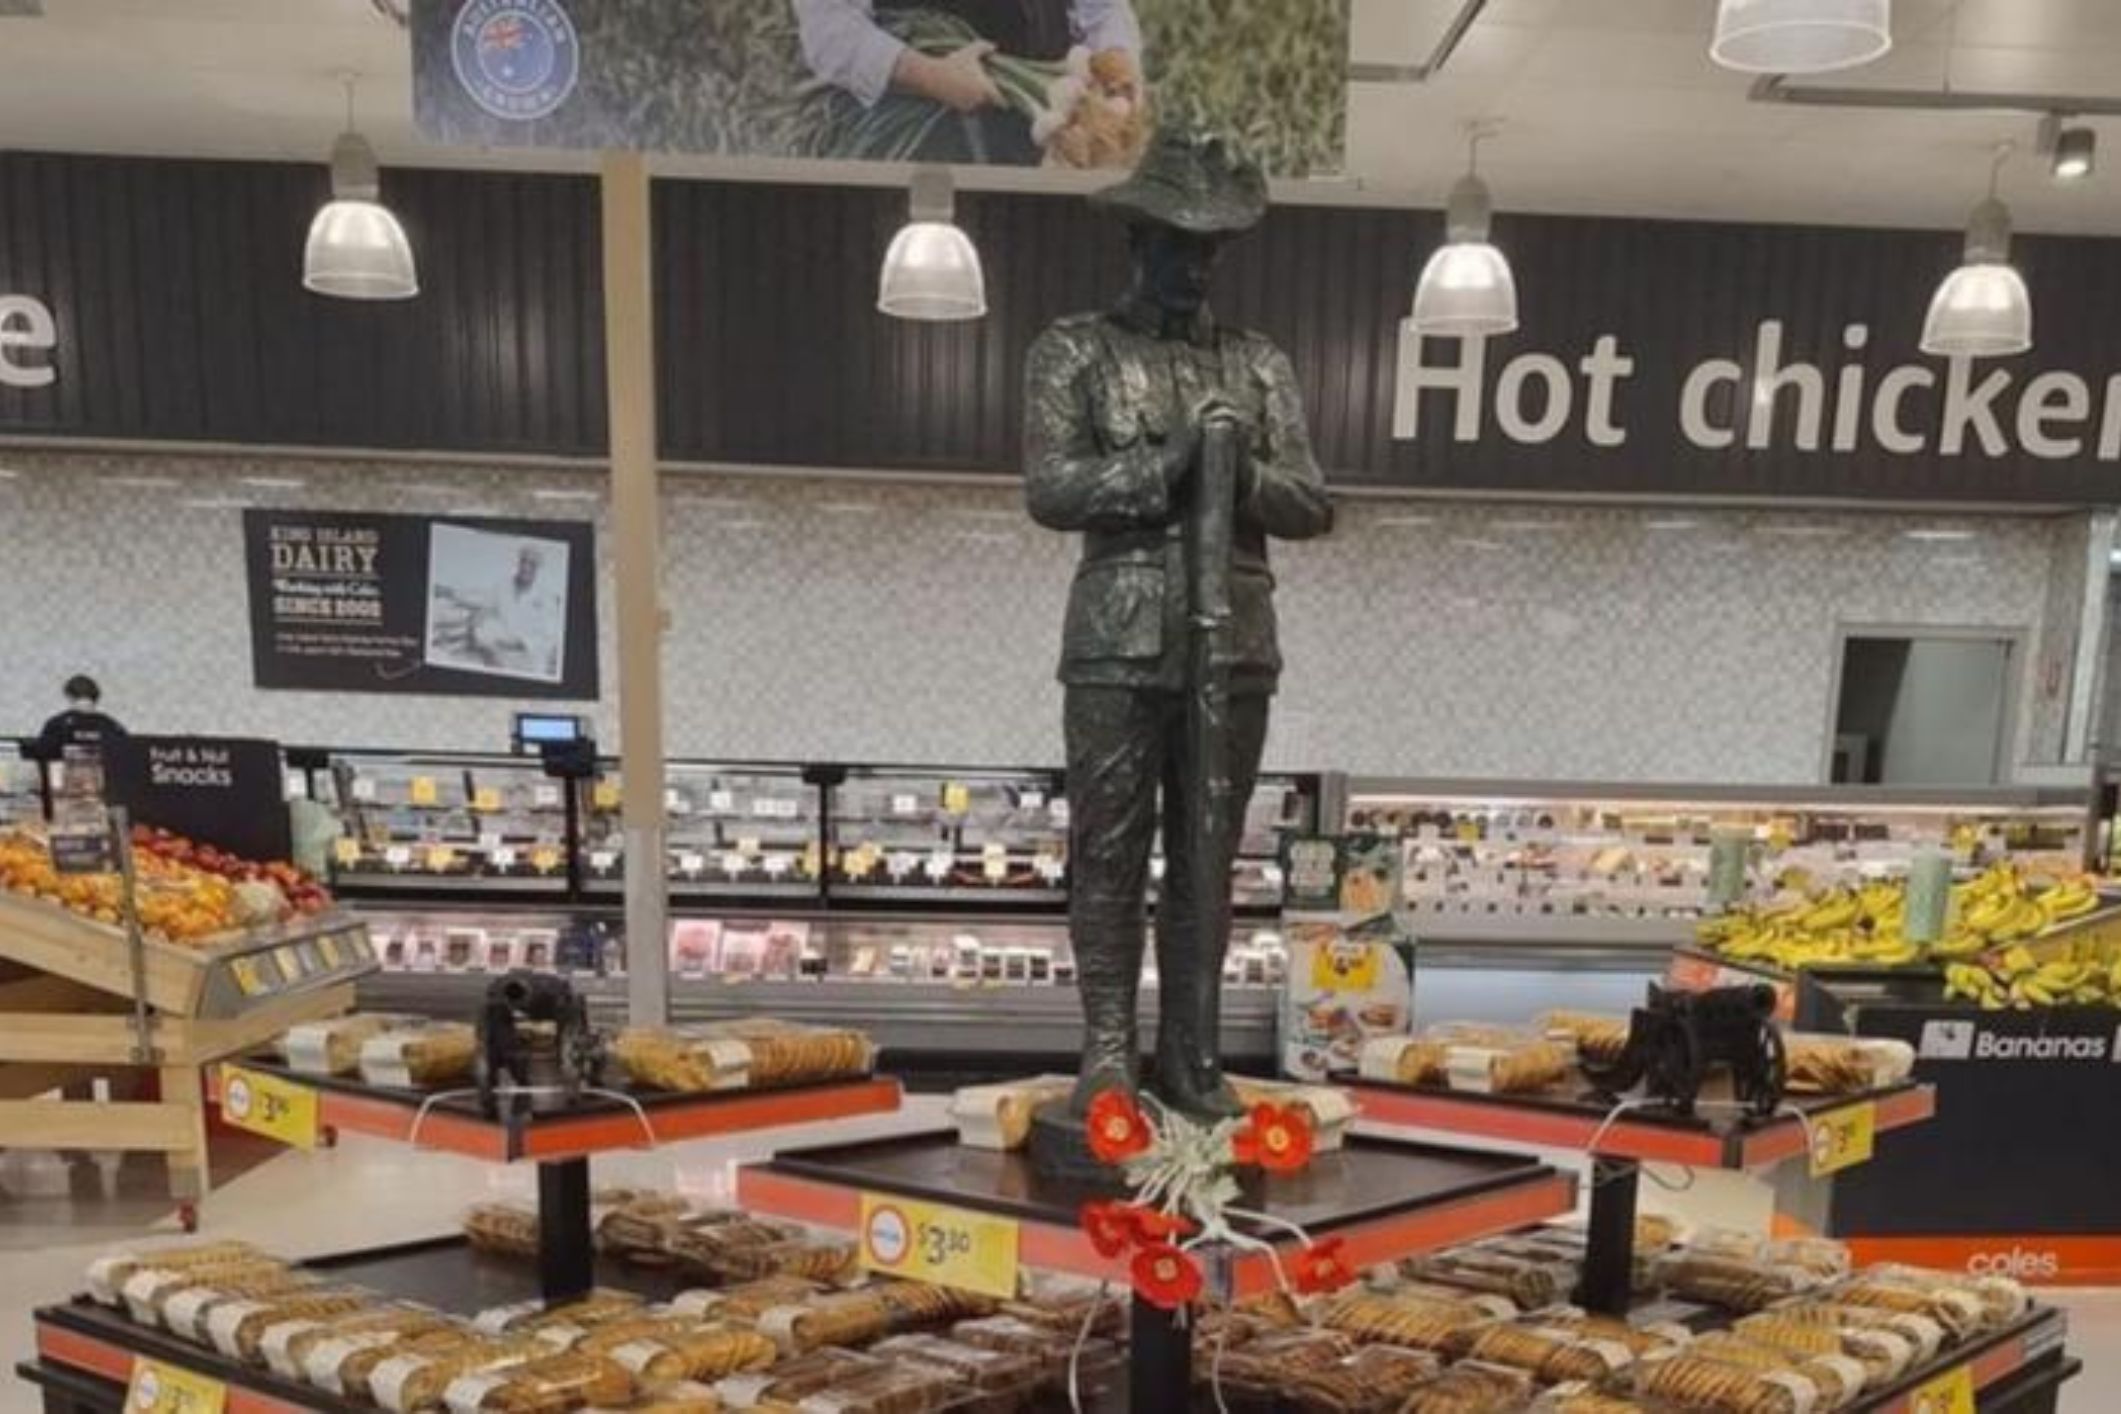 Heartwarming Anzac Day Tribute at Coles Store Sparks Social Media Frenzy